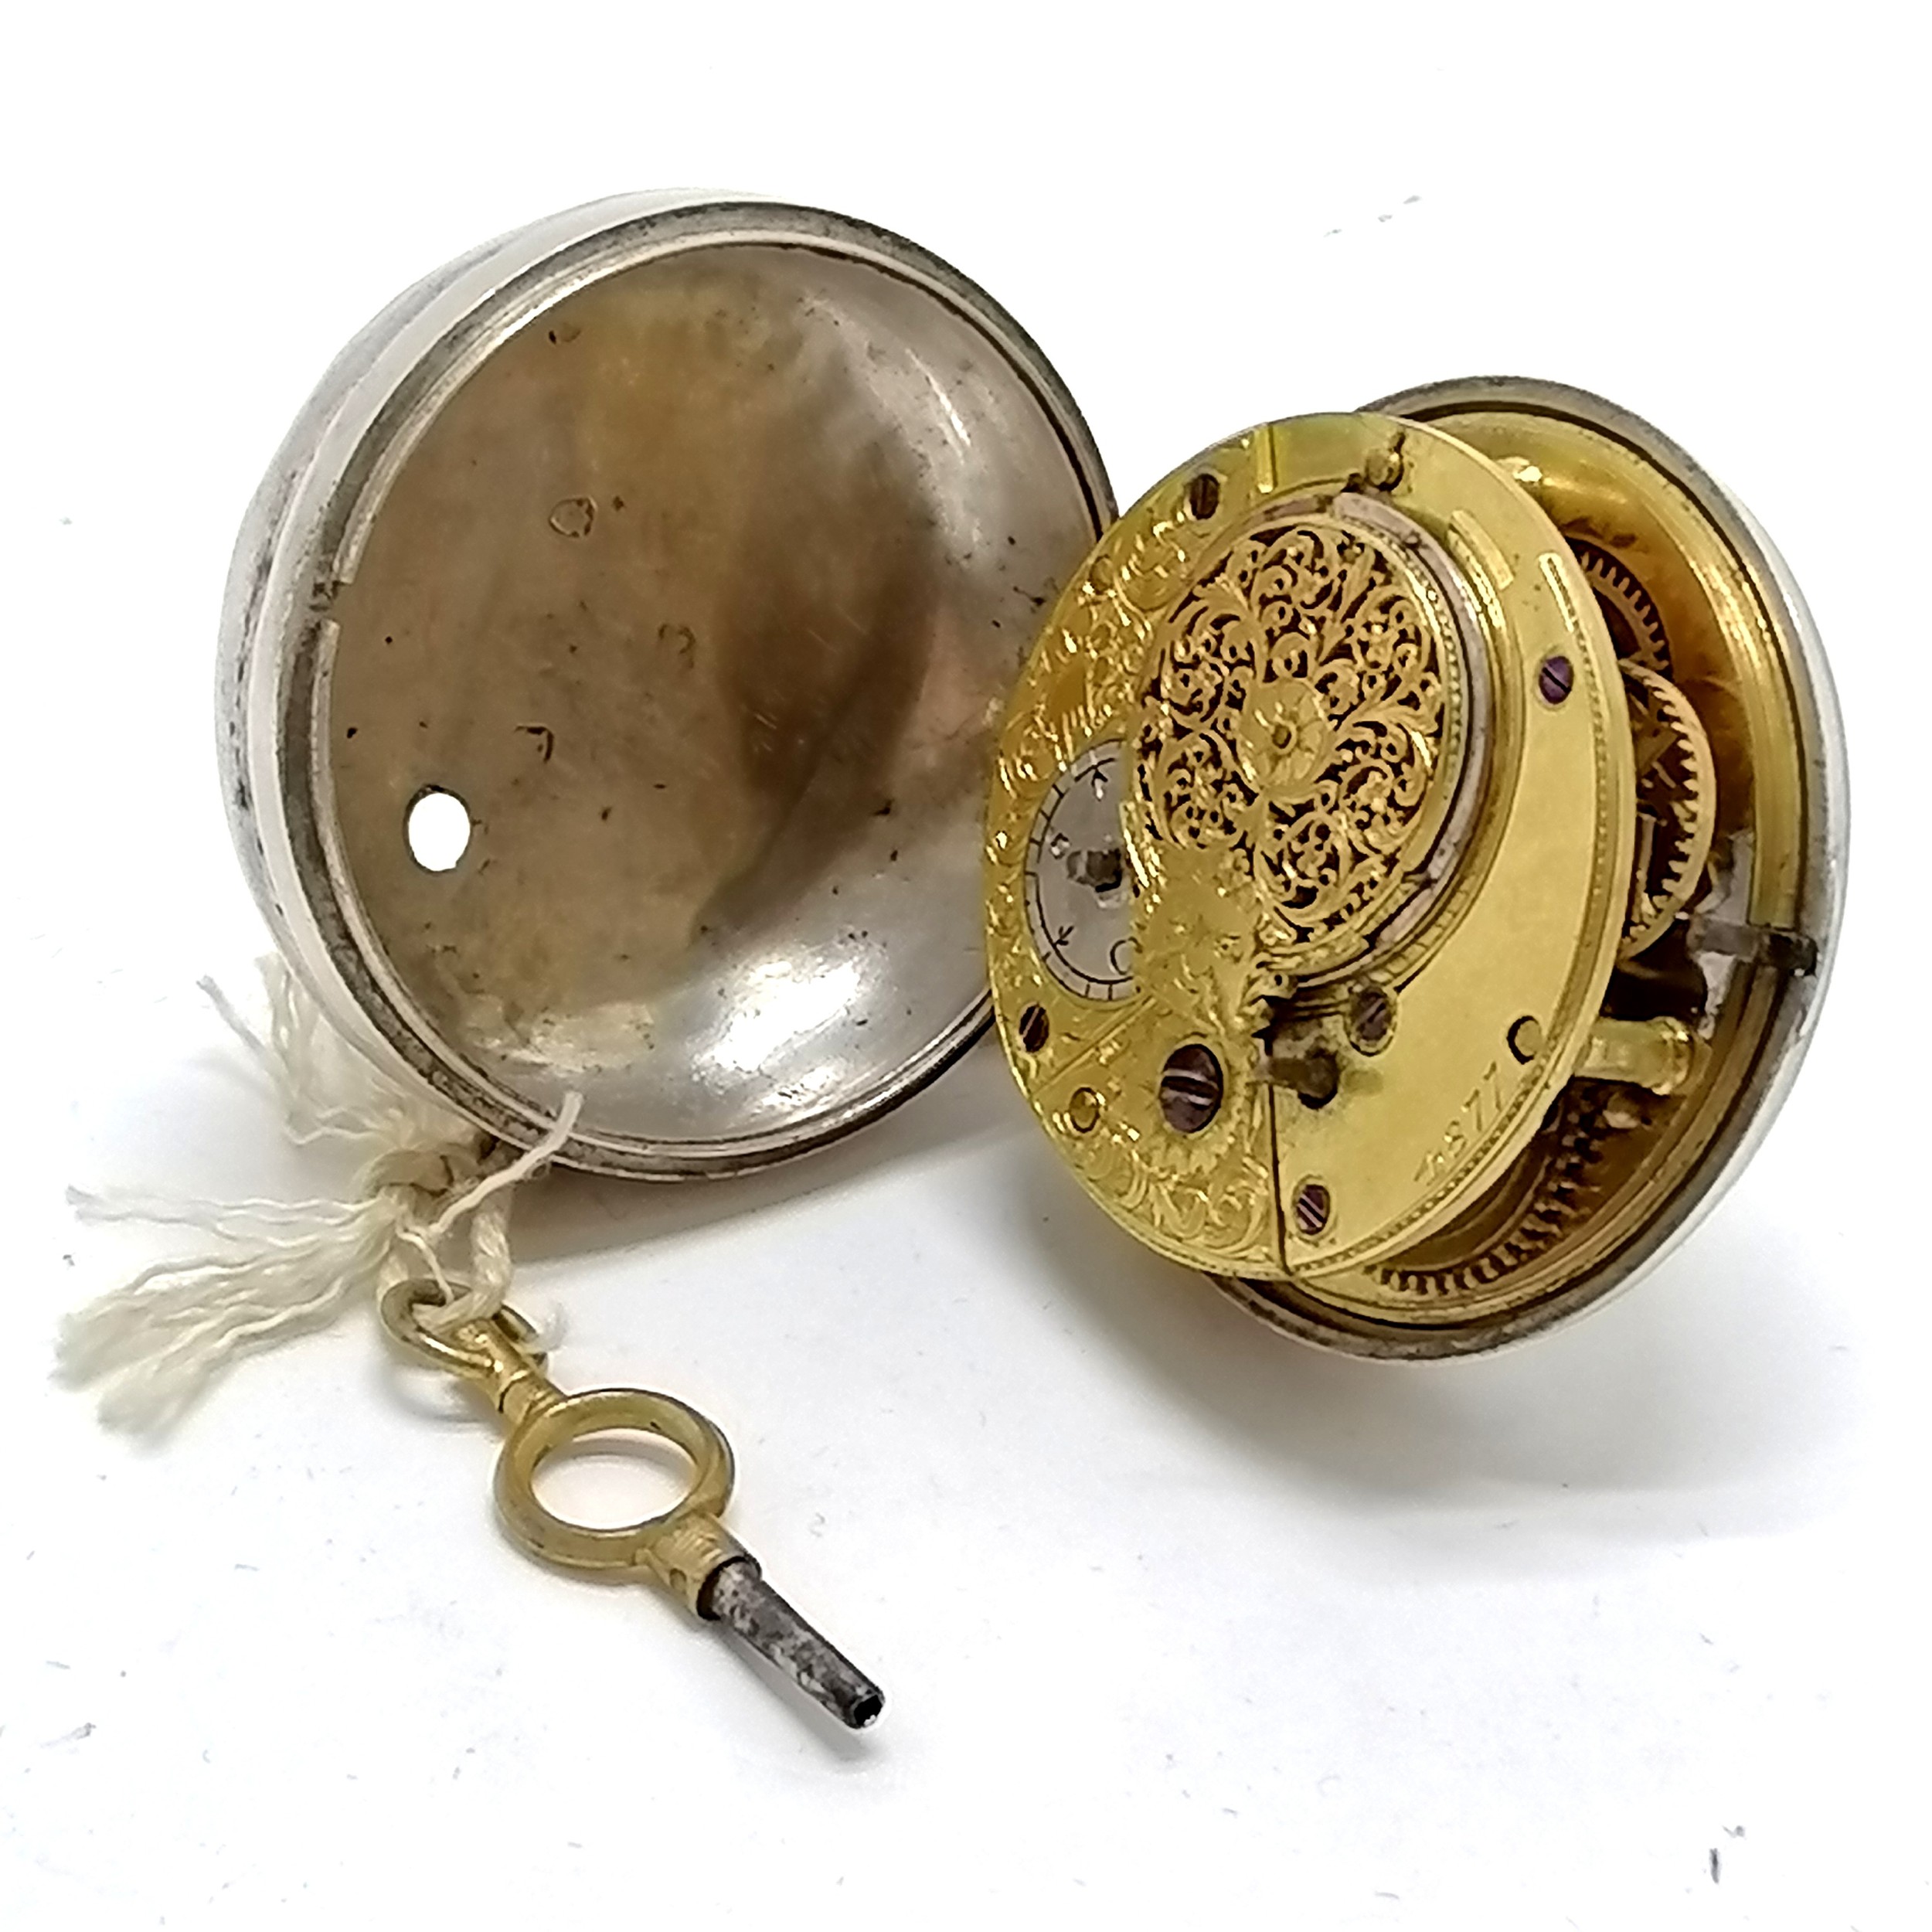 Antique silver pair cased fusee pocket watch - silver 58mm outer case 1799 by John Taylor, has - Image 3 of 4